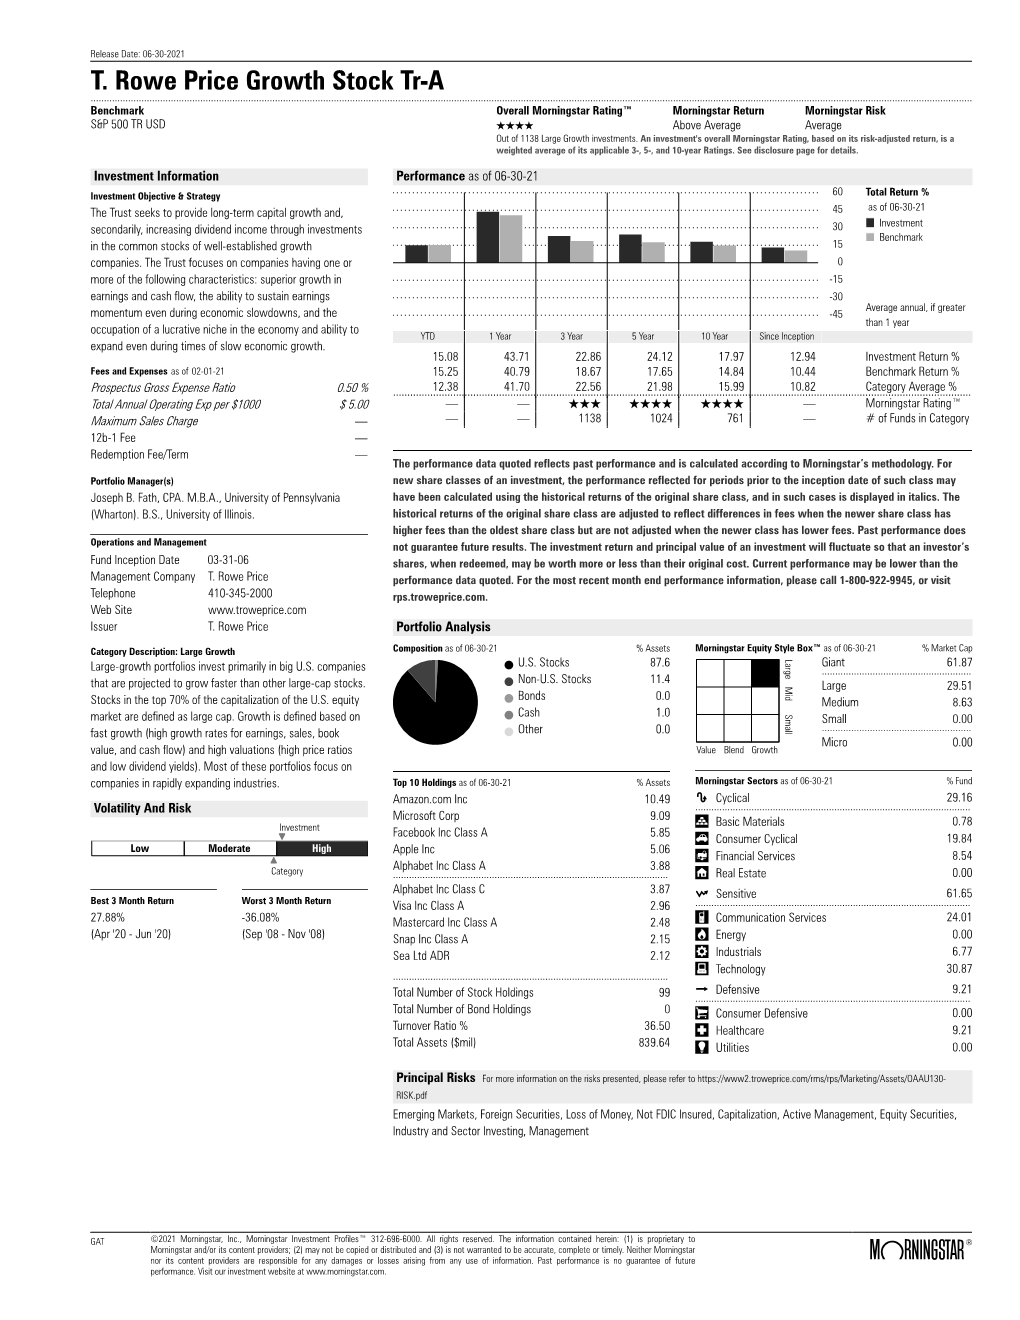 T. Rowe Price Growth Stock Tr-A